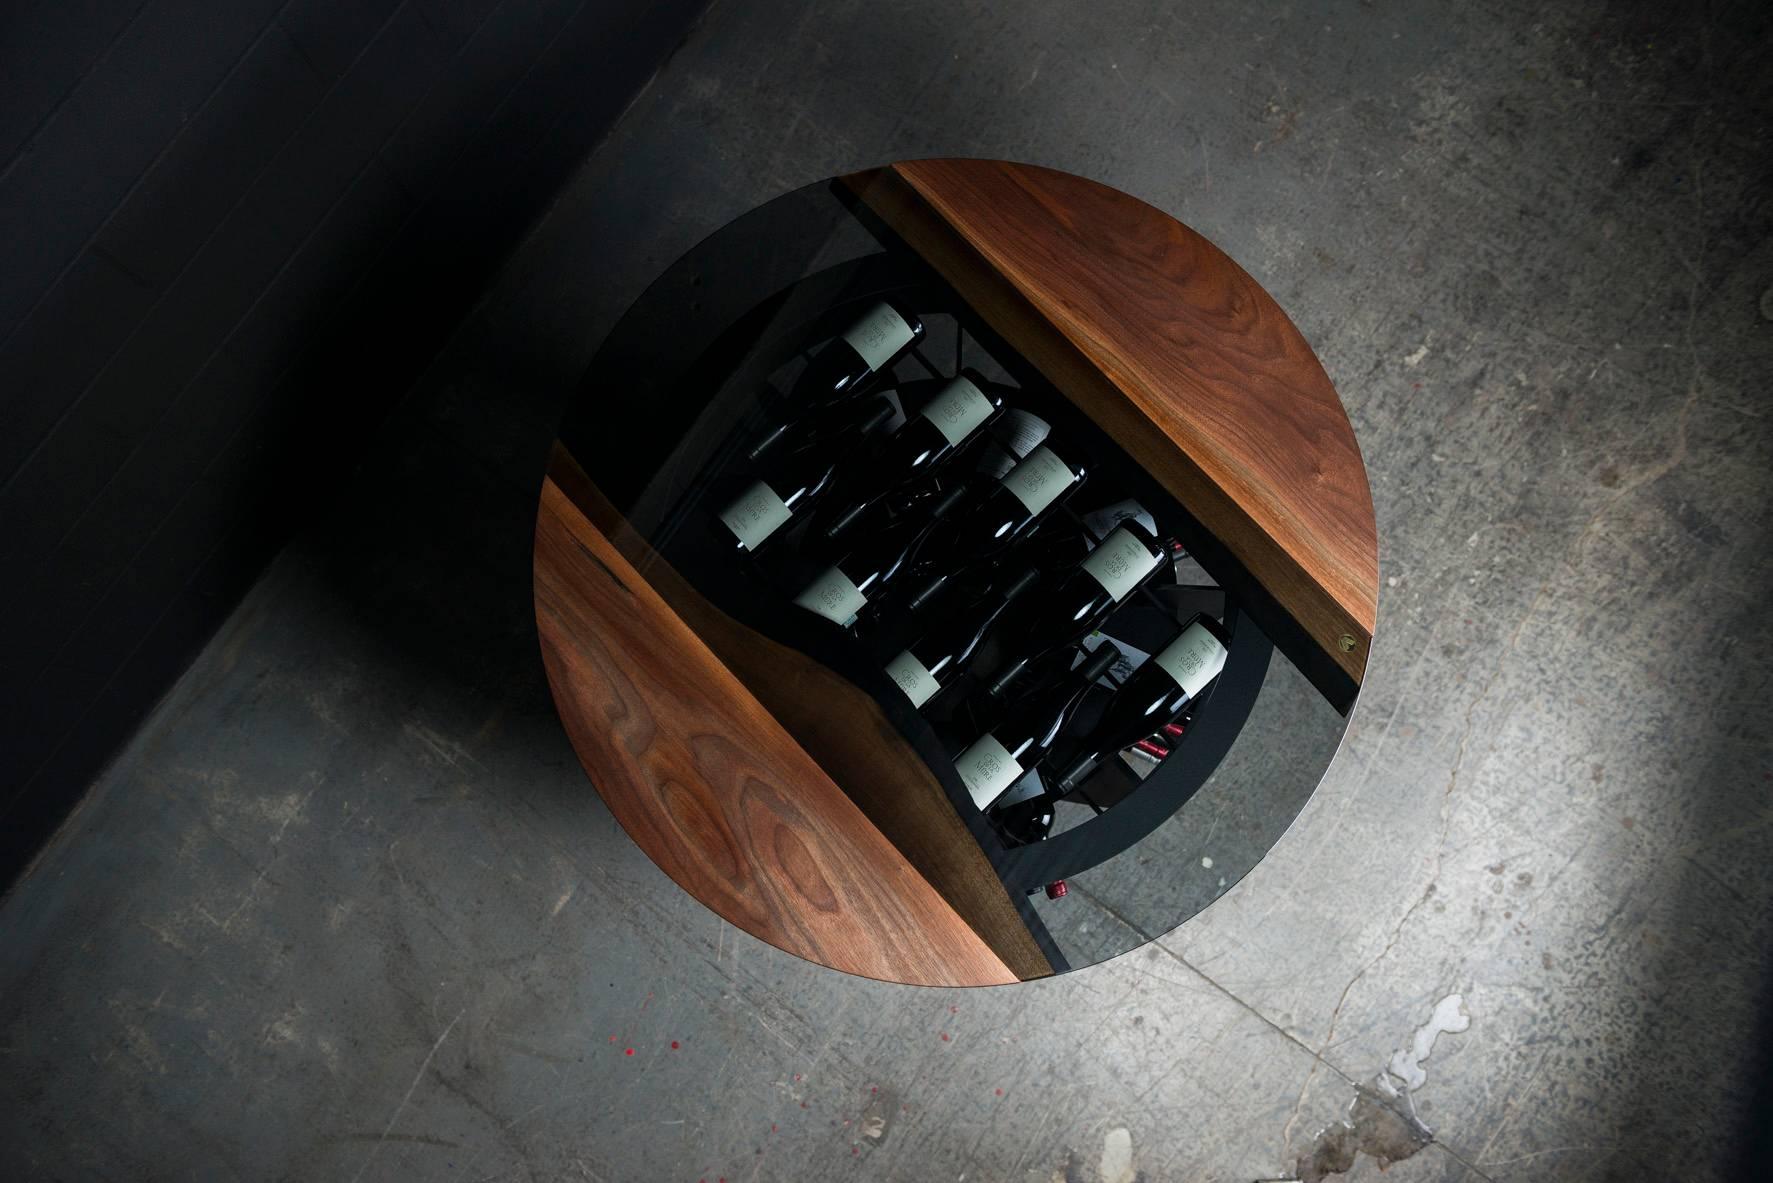 Our wine tasting and storage round table is handmade to order from an hand selected unique black walnut slab with an hand rubbed natural oil and wax finish that enhance the real beauty of the wood and give a natural warm touch. The seamless tinted